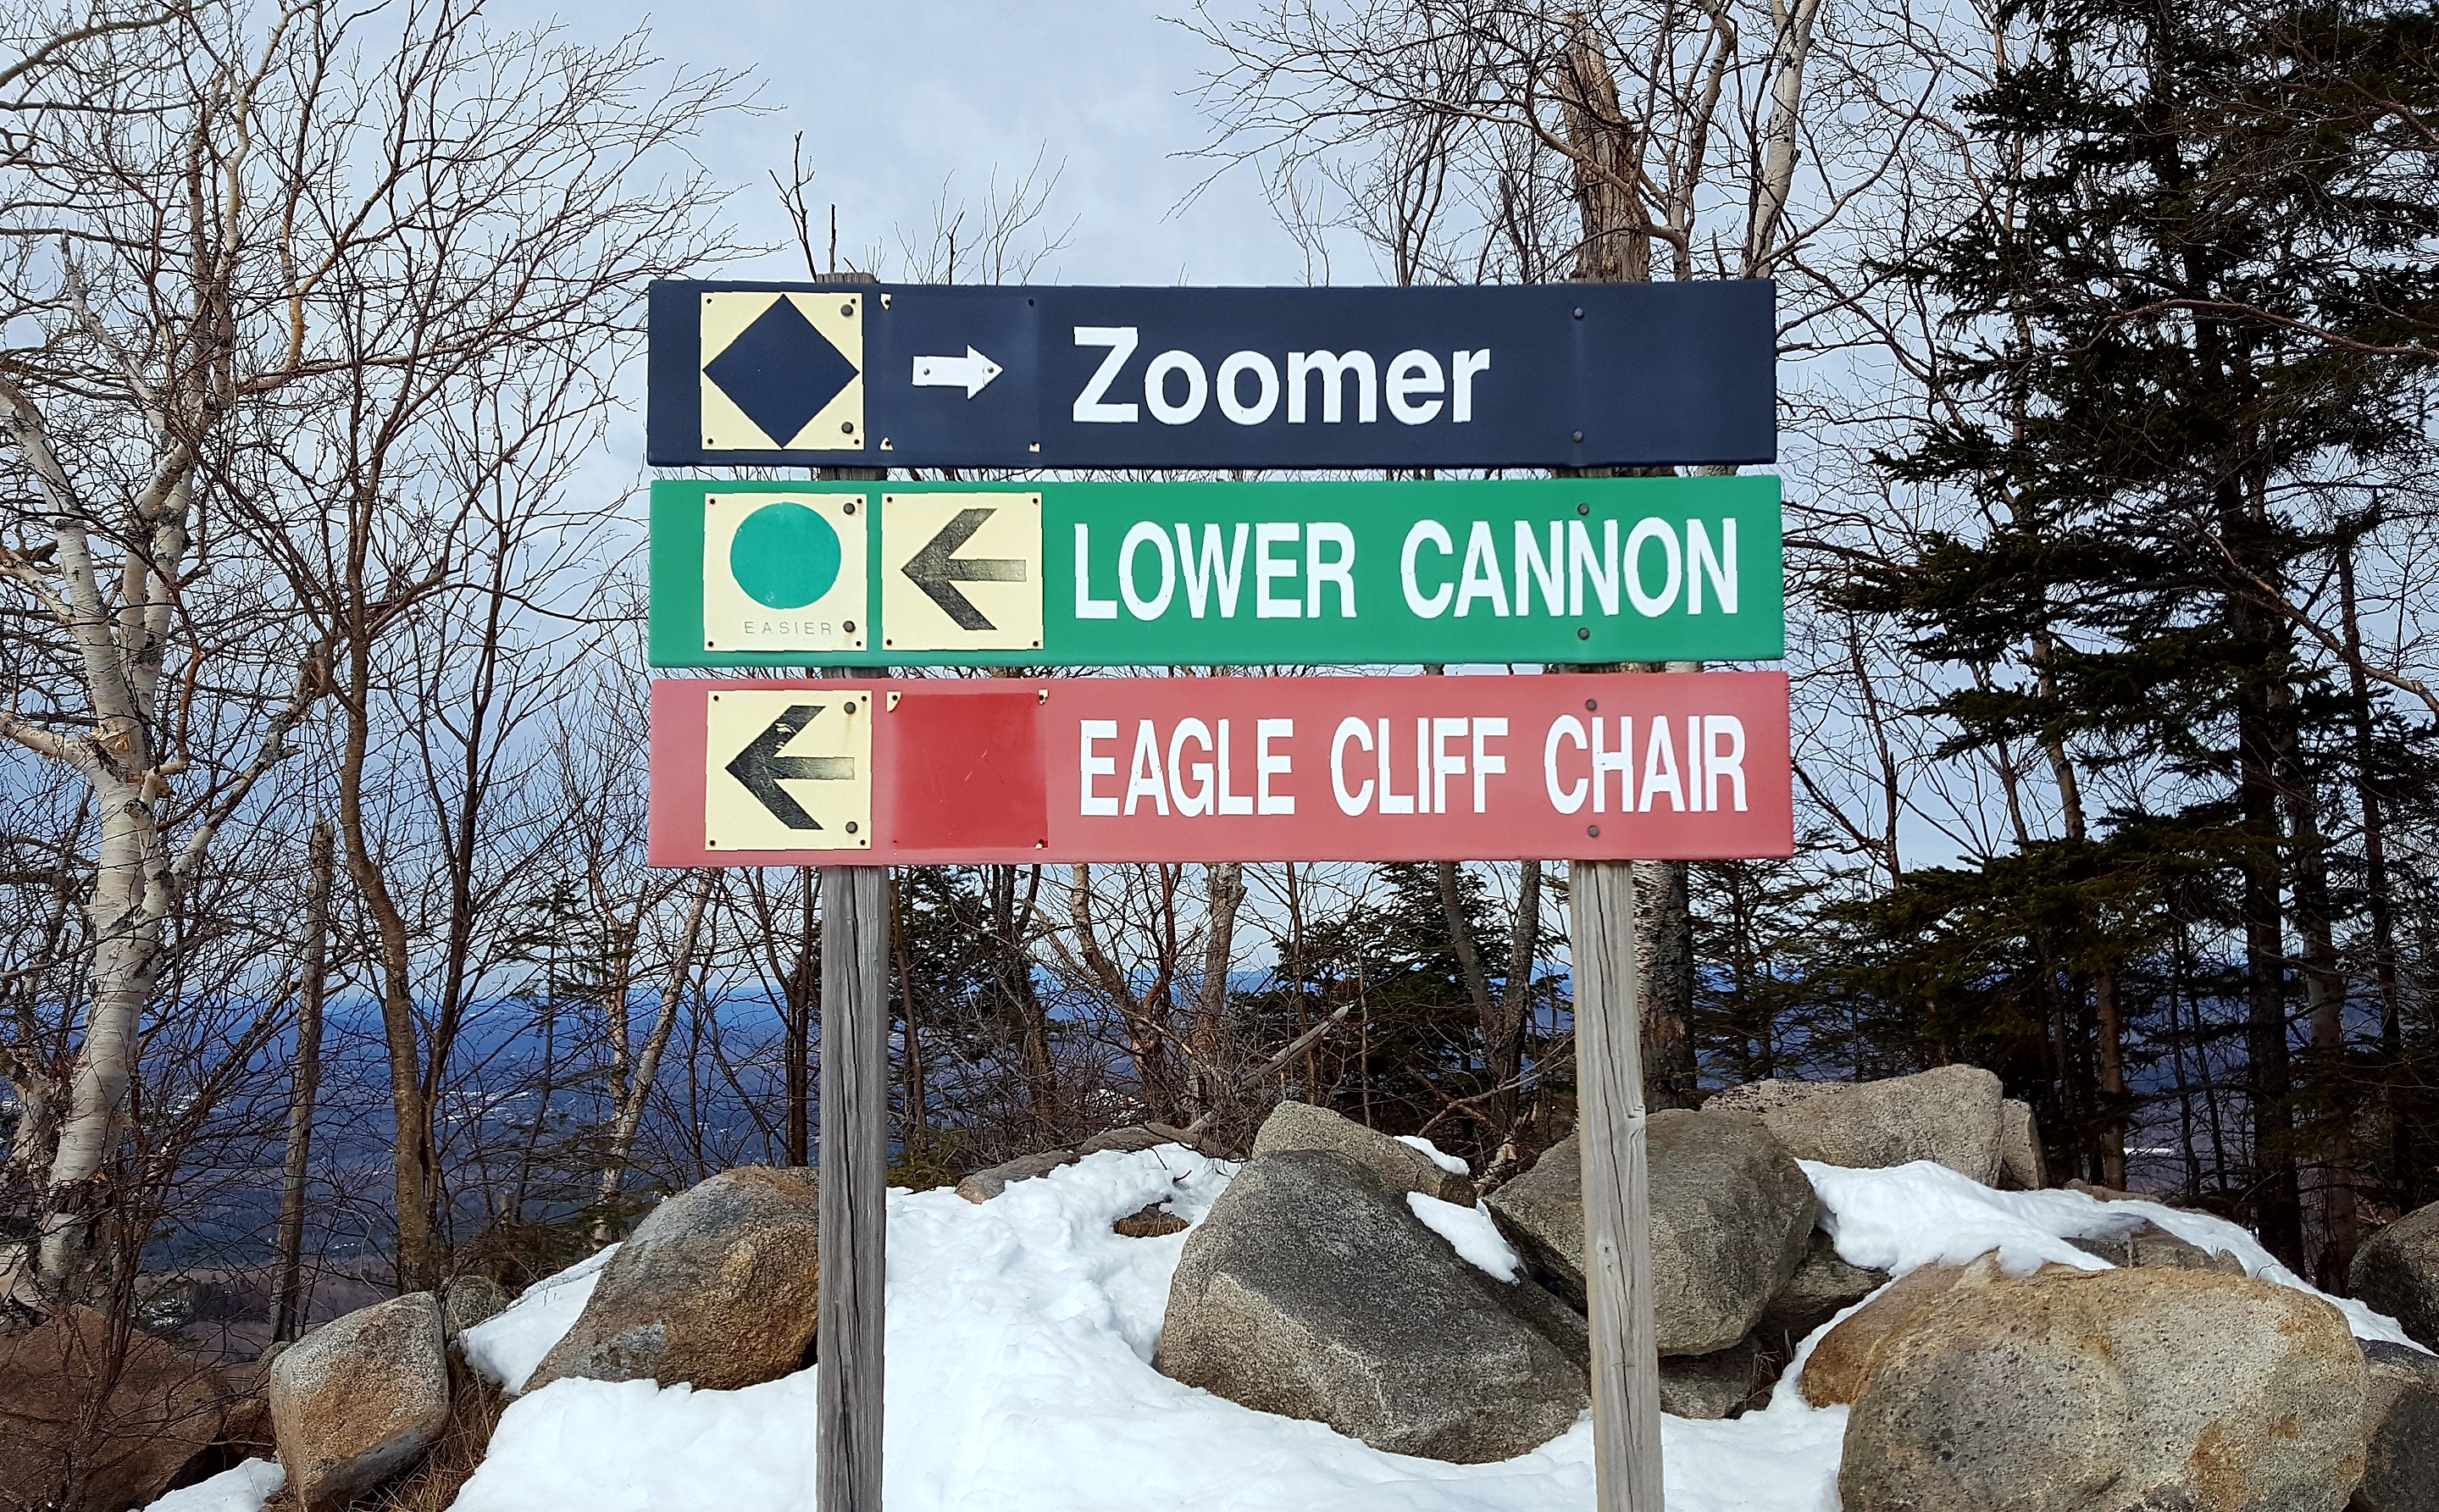 Ski trail signs. Text: Zoomer, Lower Cannon, Eagle Cliff Chair.